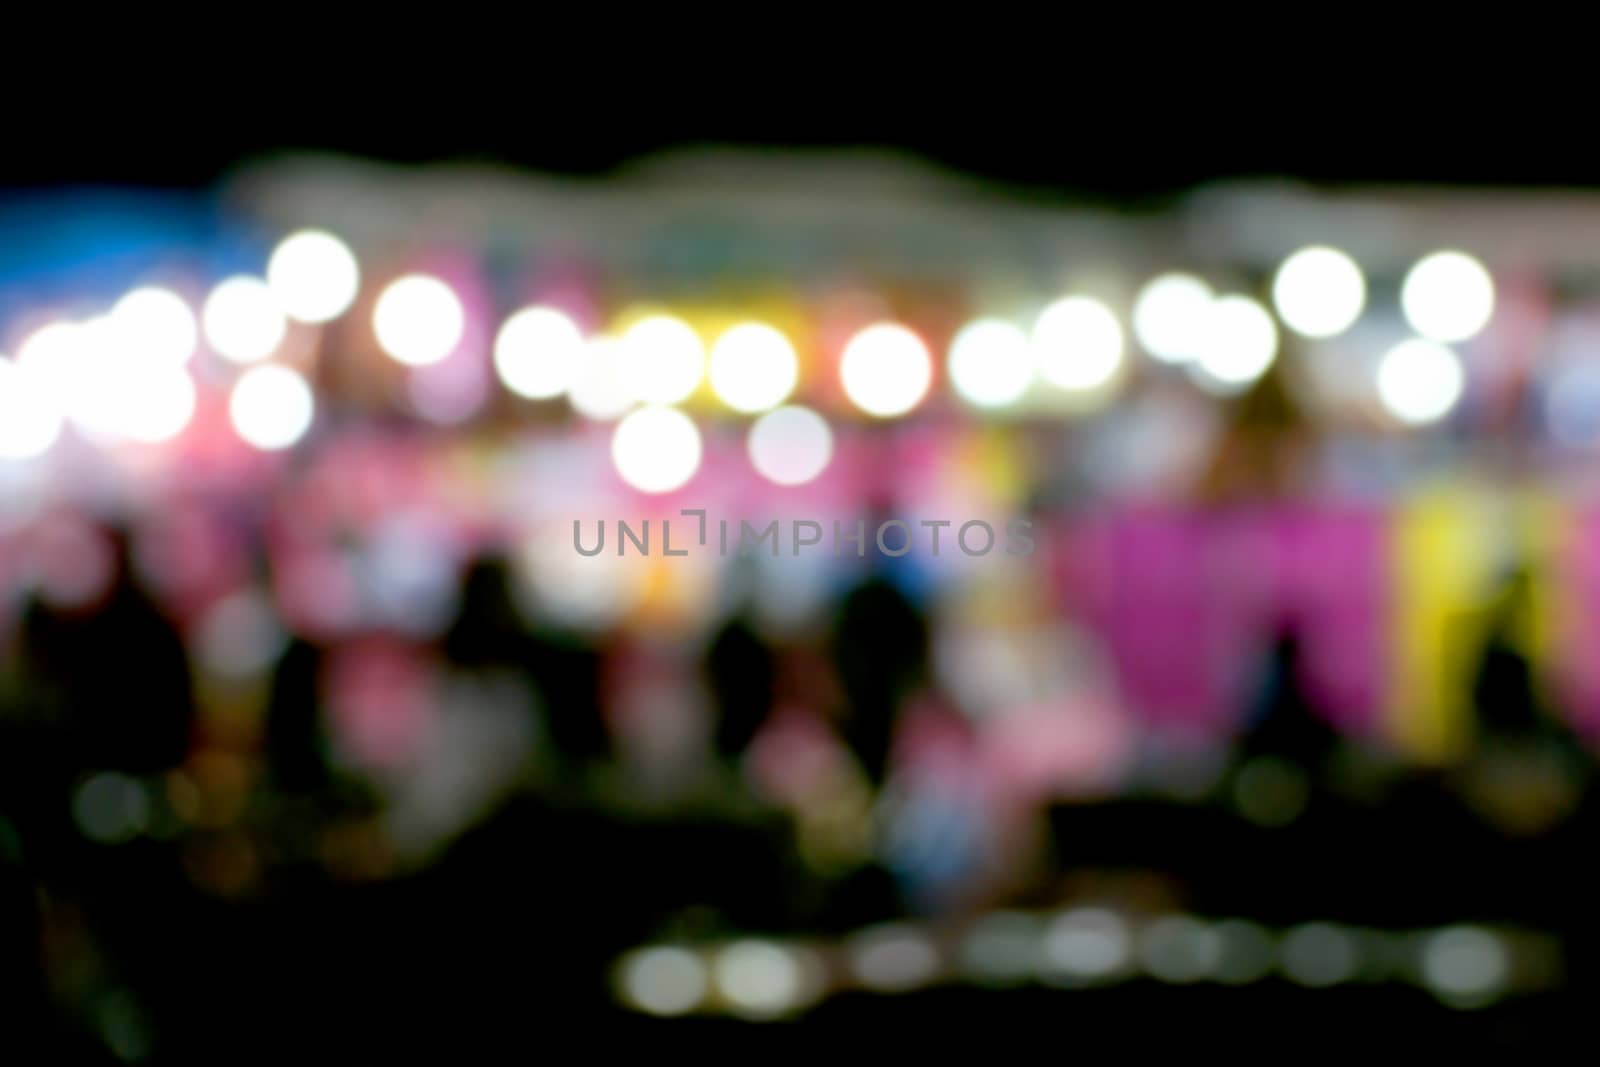 Defocused and blurred image of people at amusement park at night for background usage.